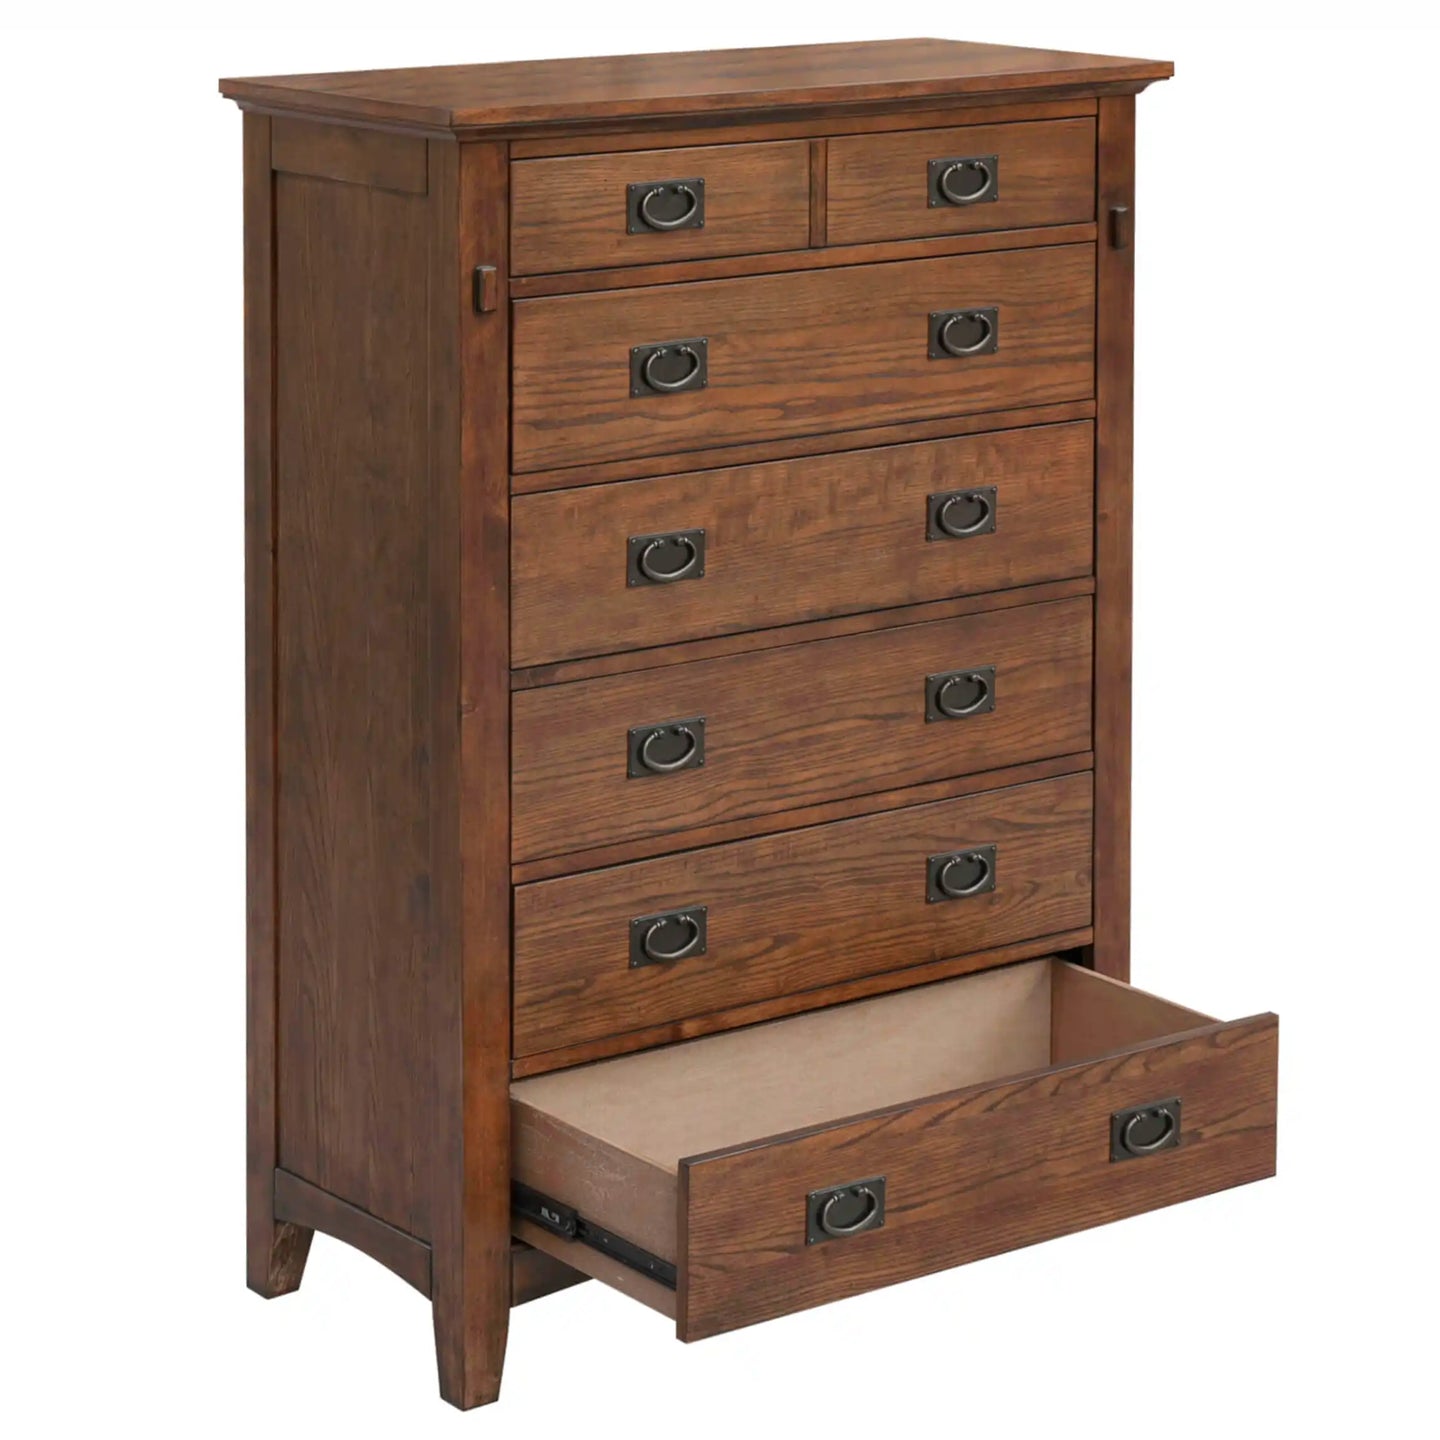 Sunset Trading Mission Bay 6 Drawer Bedroom Chest | Amish Brown Solid Wood | Fully Assembled Vertical Dresser